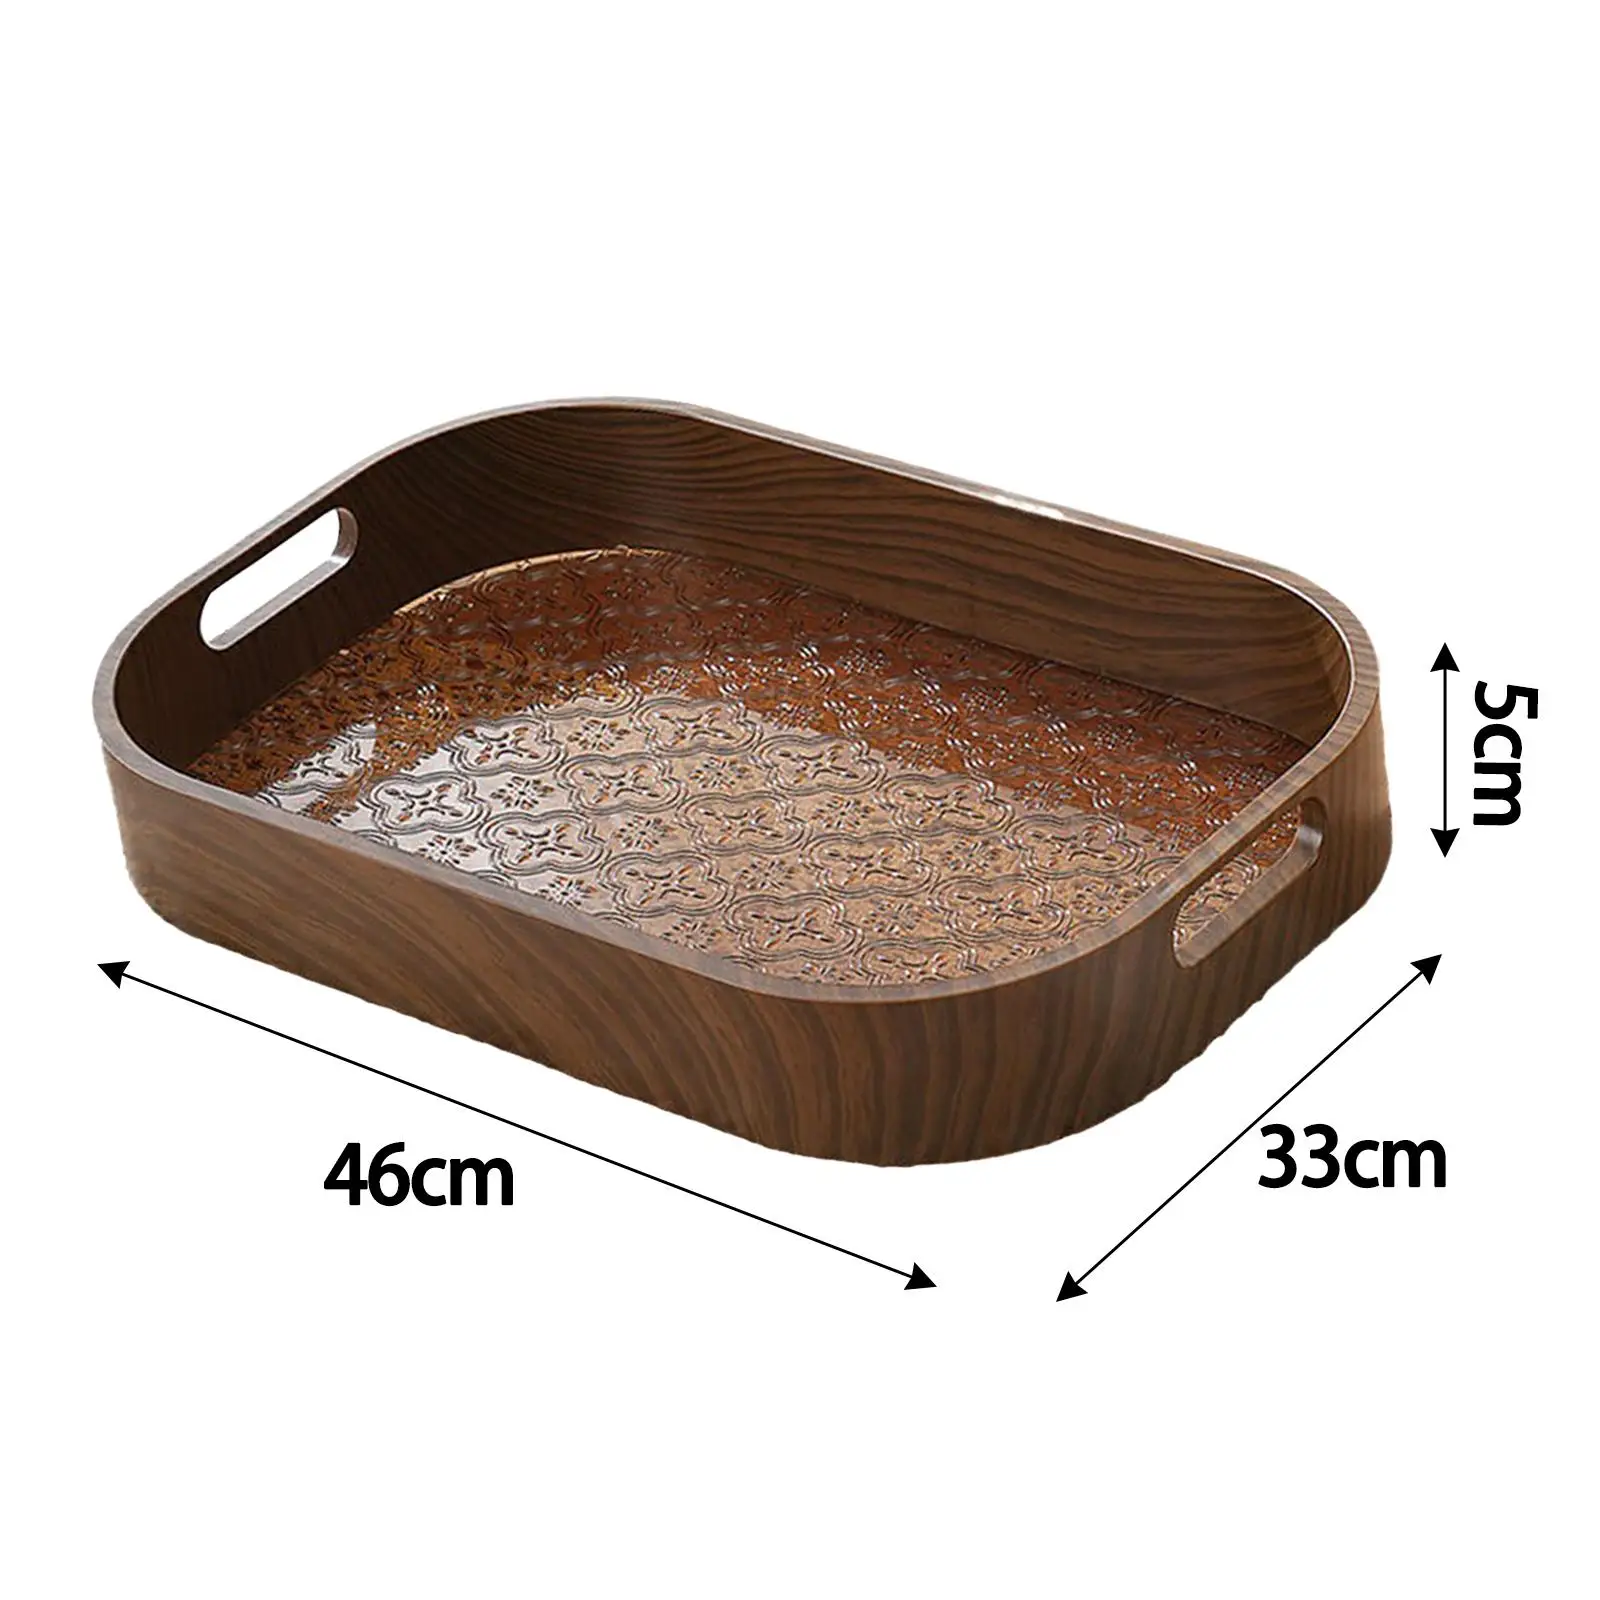 Multifunctional Serving Tray Breakfast Tray Countertop Decorative Tray for Dining Table Kitchen Pantry Table Centerpiece Cabinet